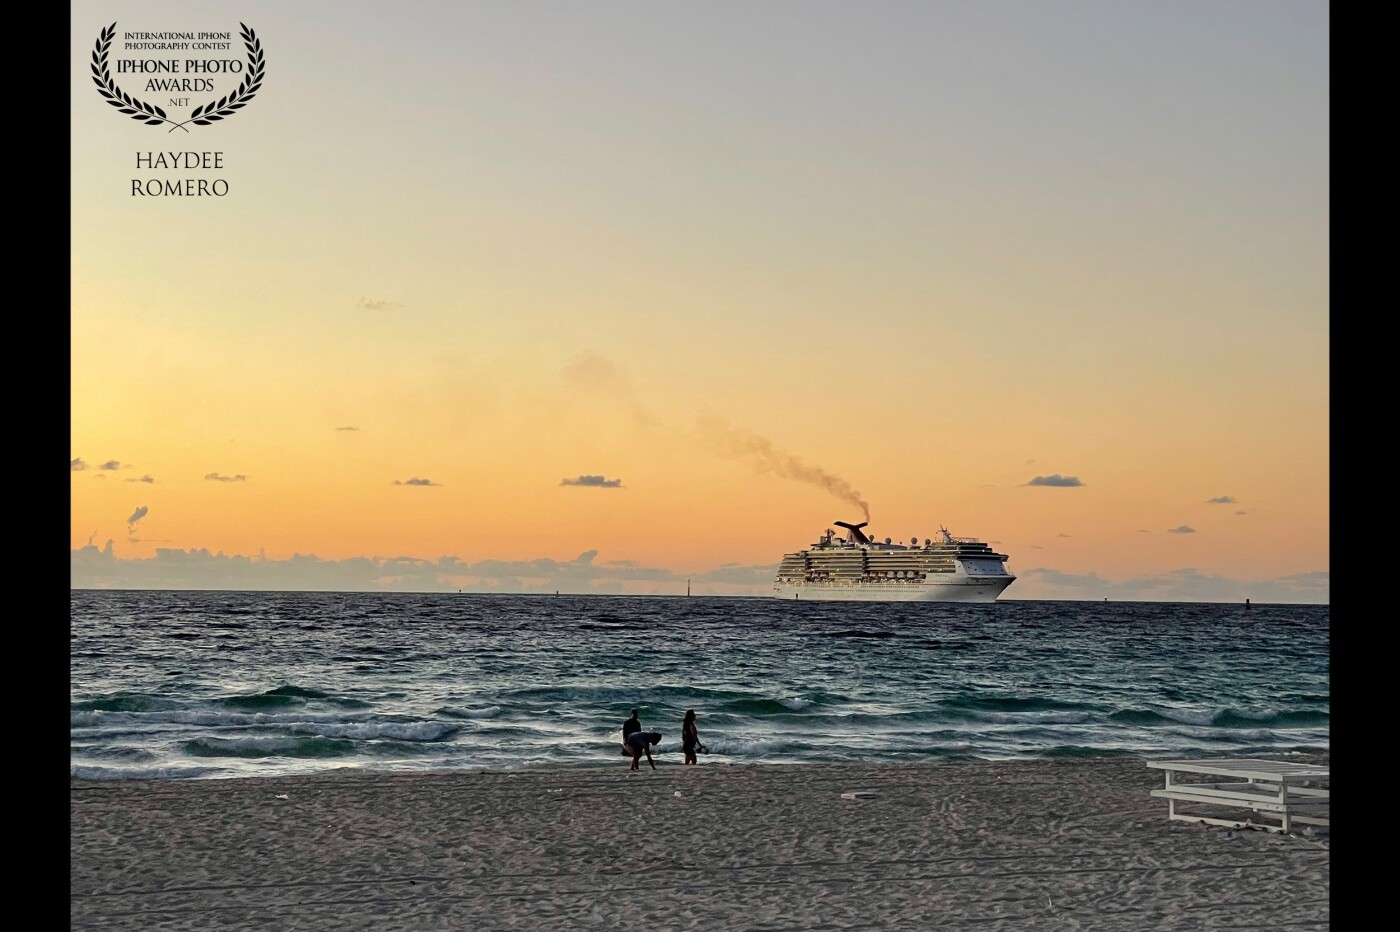 In one of my early walk on the beach I watch a cruise ship makes its way toward harbor as the light of the rising sun glistens on the ocean waters off Miami Beach, Florida.